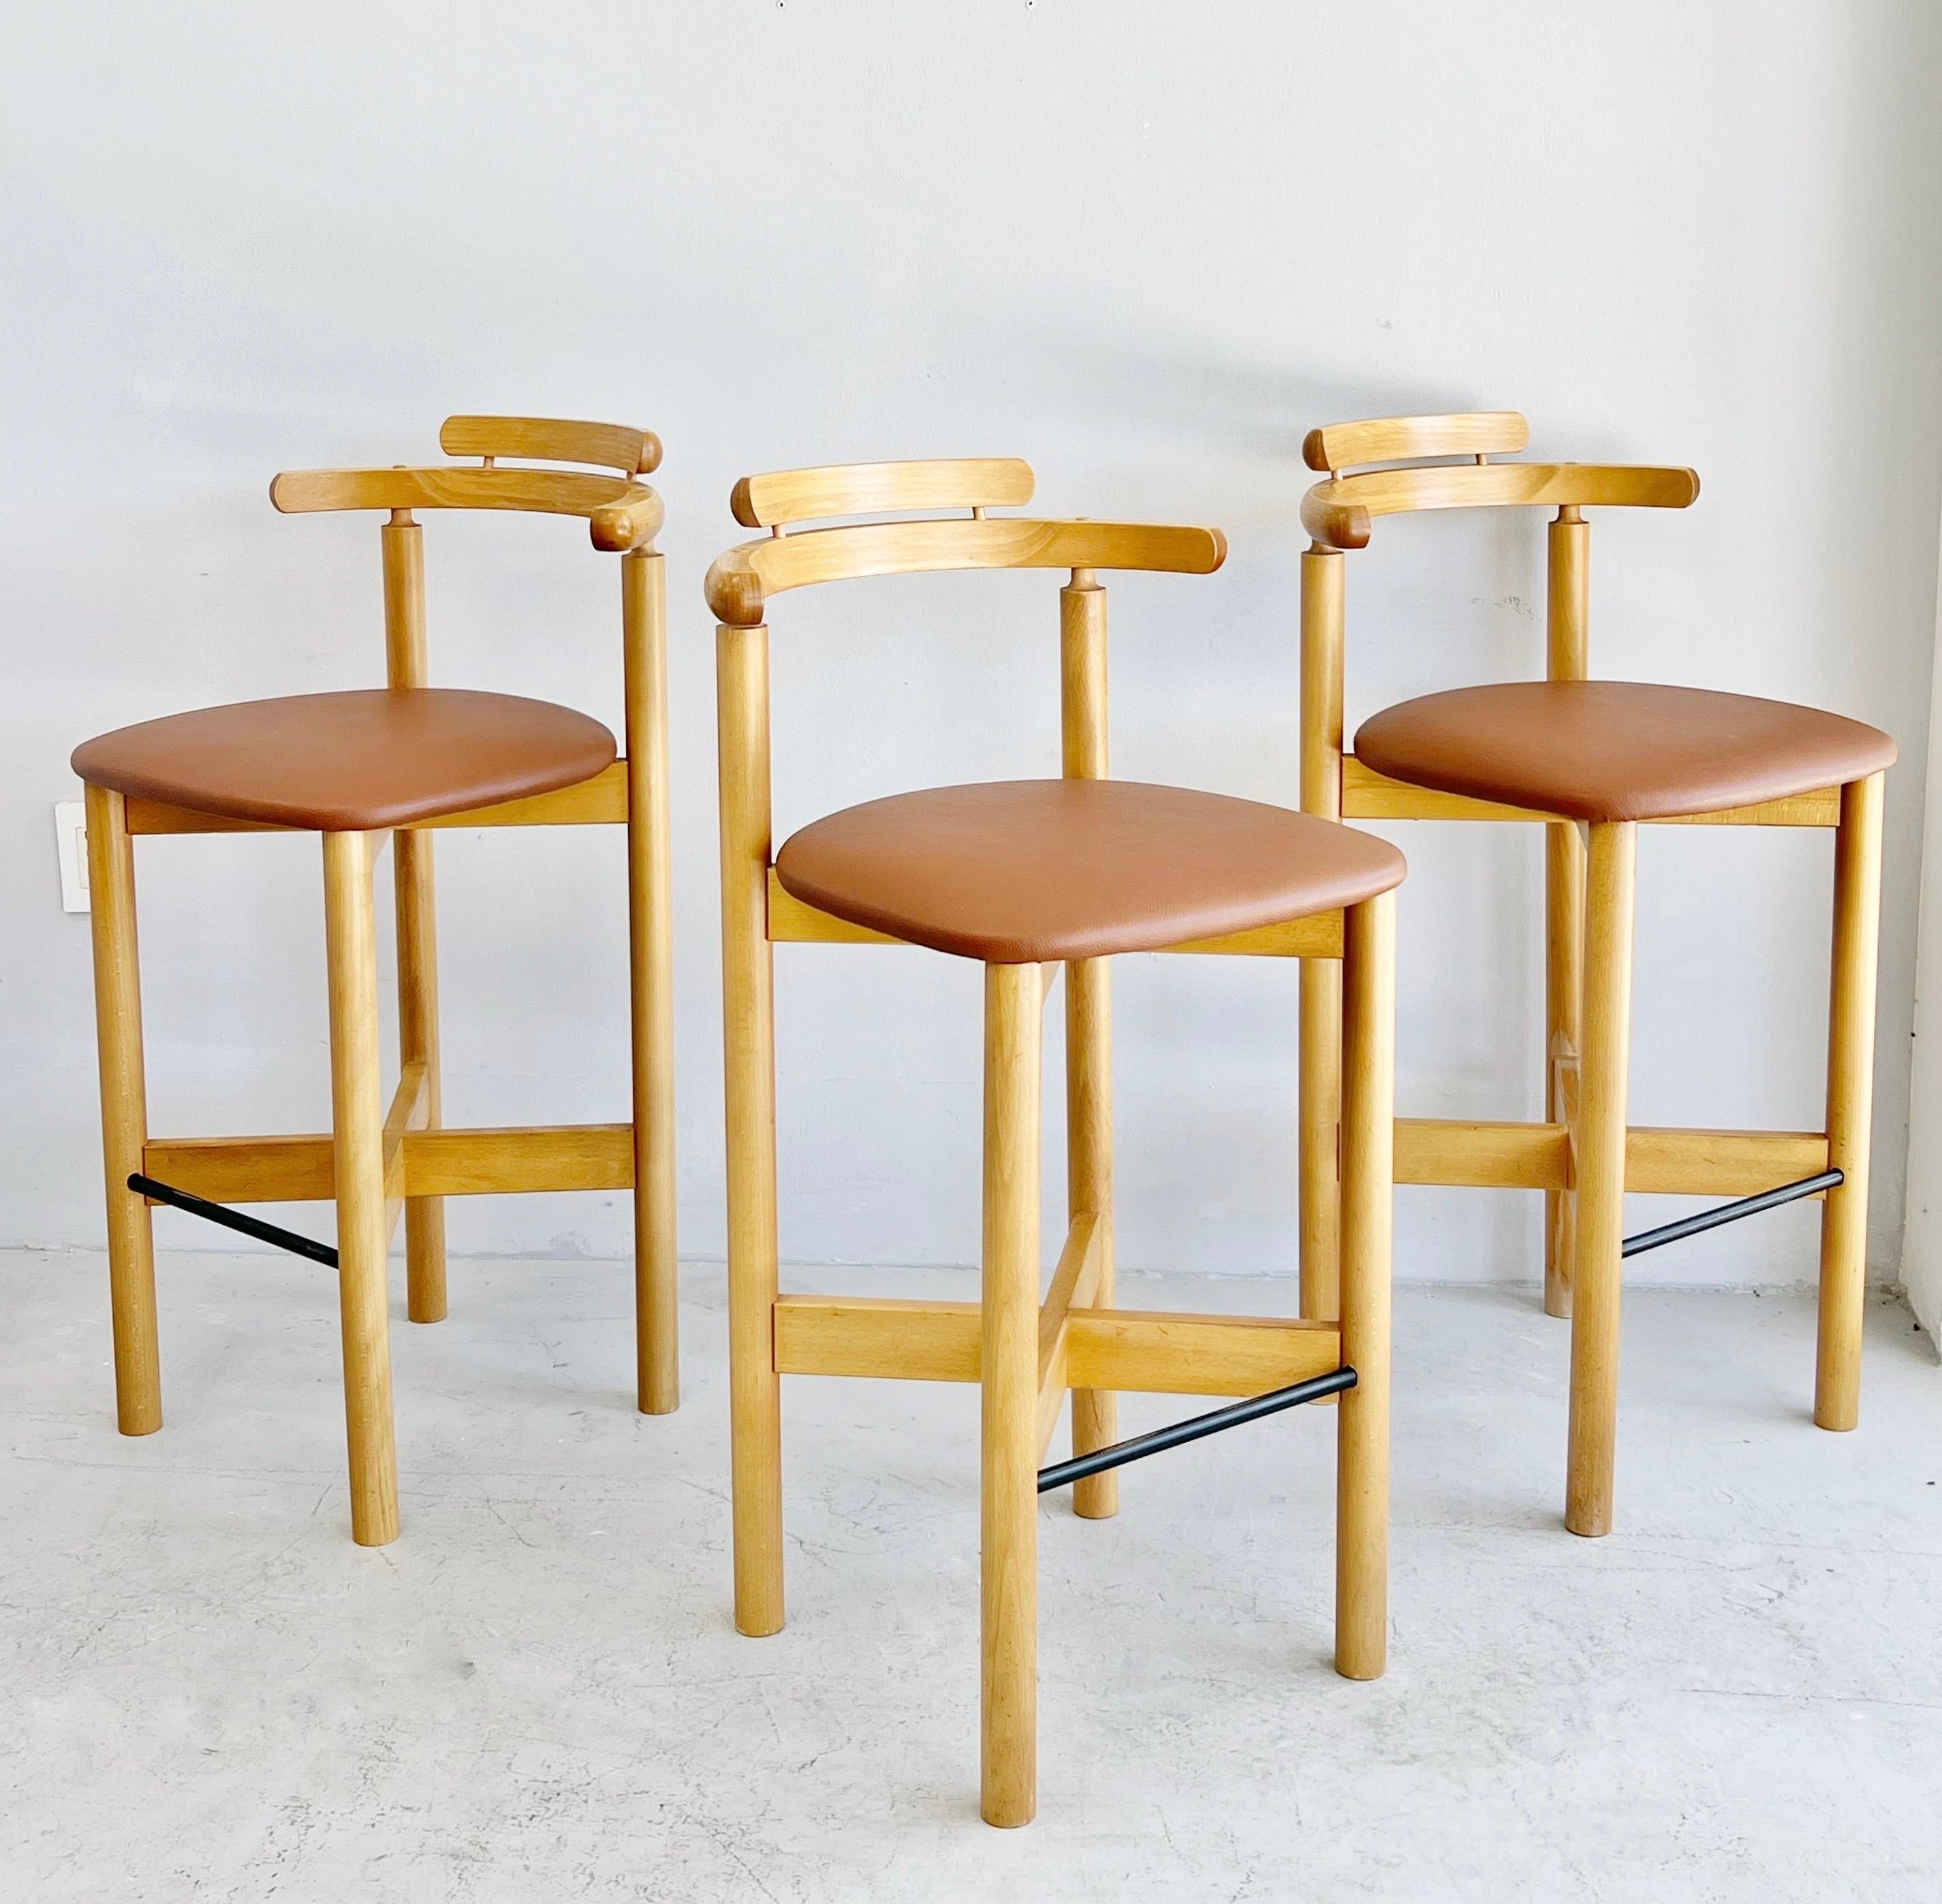 A set of modern barstools by Gangso Mobler. Done in solid wood and upholstered seats with black metal foot rests.